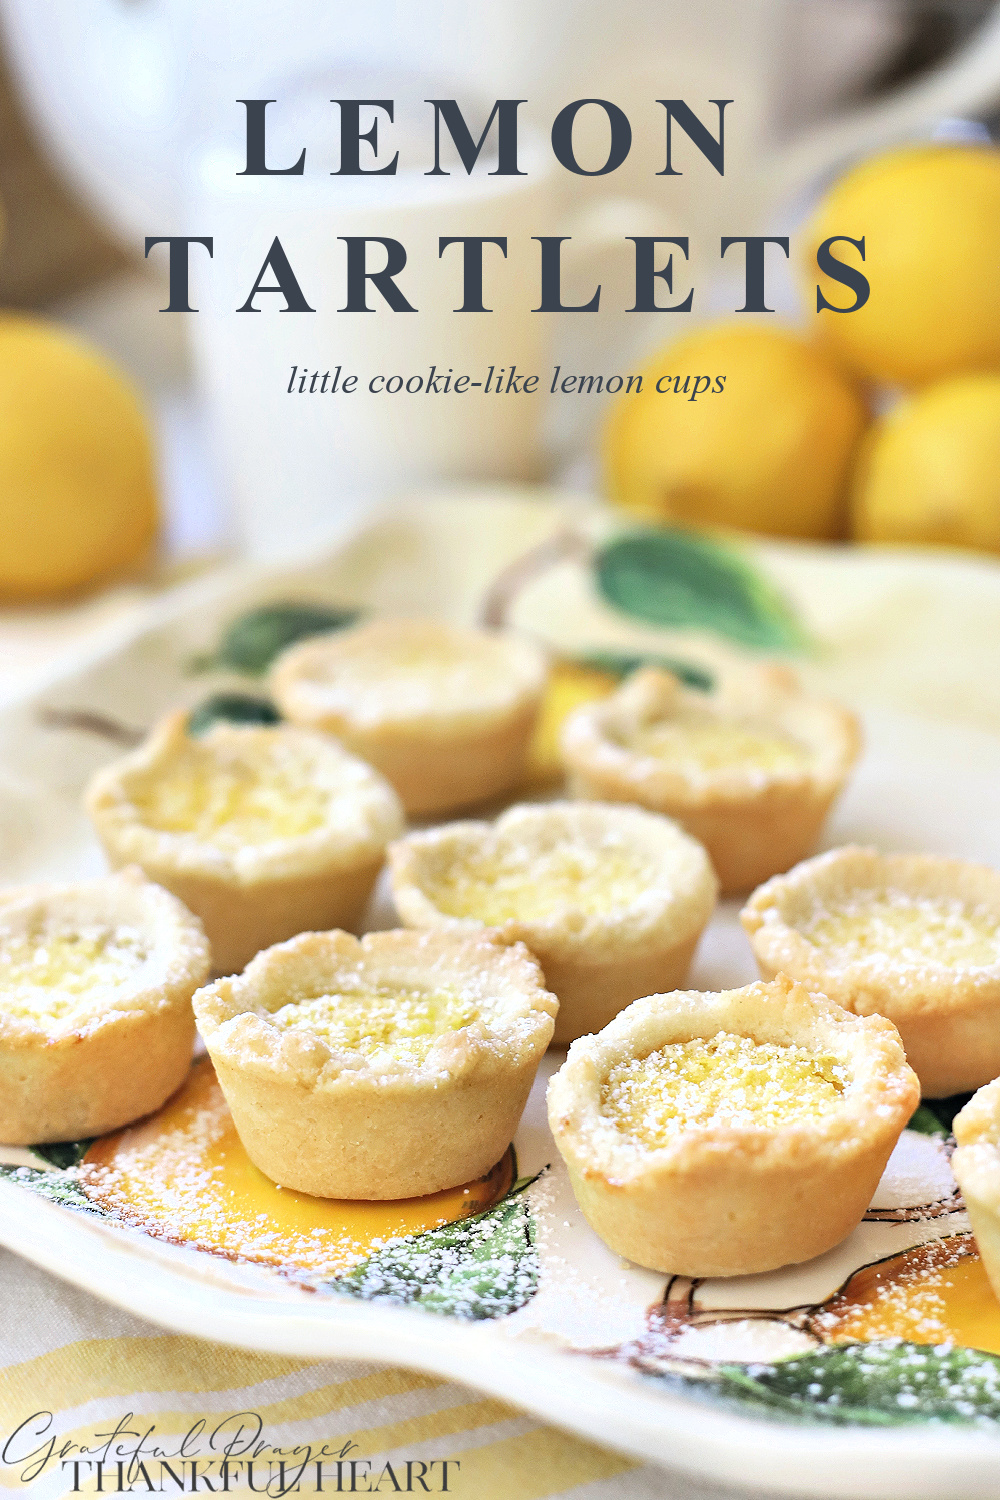 Easy recipe for Lemon Tartlets. Delicious little cookies filled with a sweet lemony center are perfect for Christmas or with tea as a dessert.